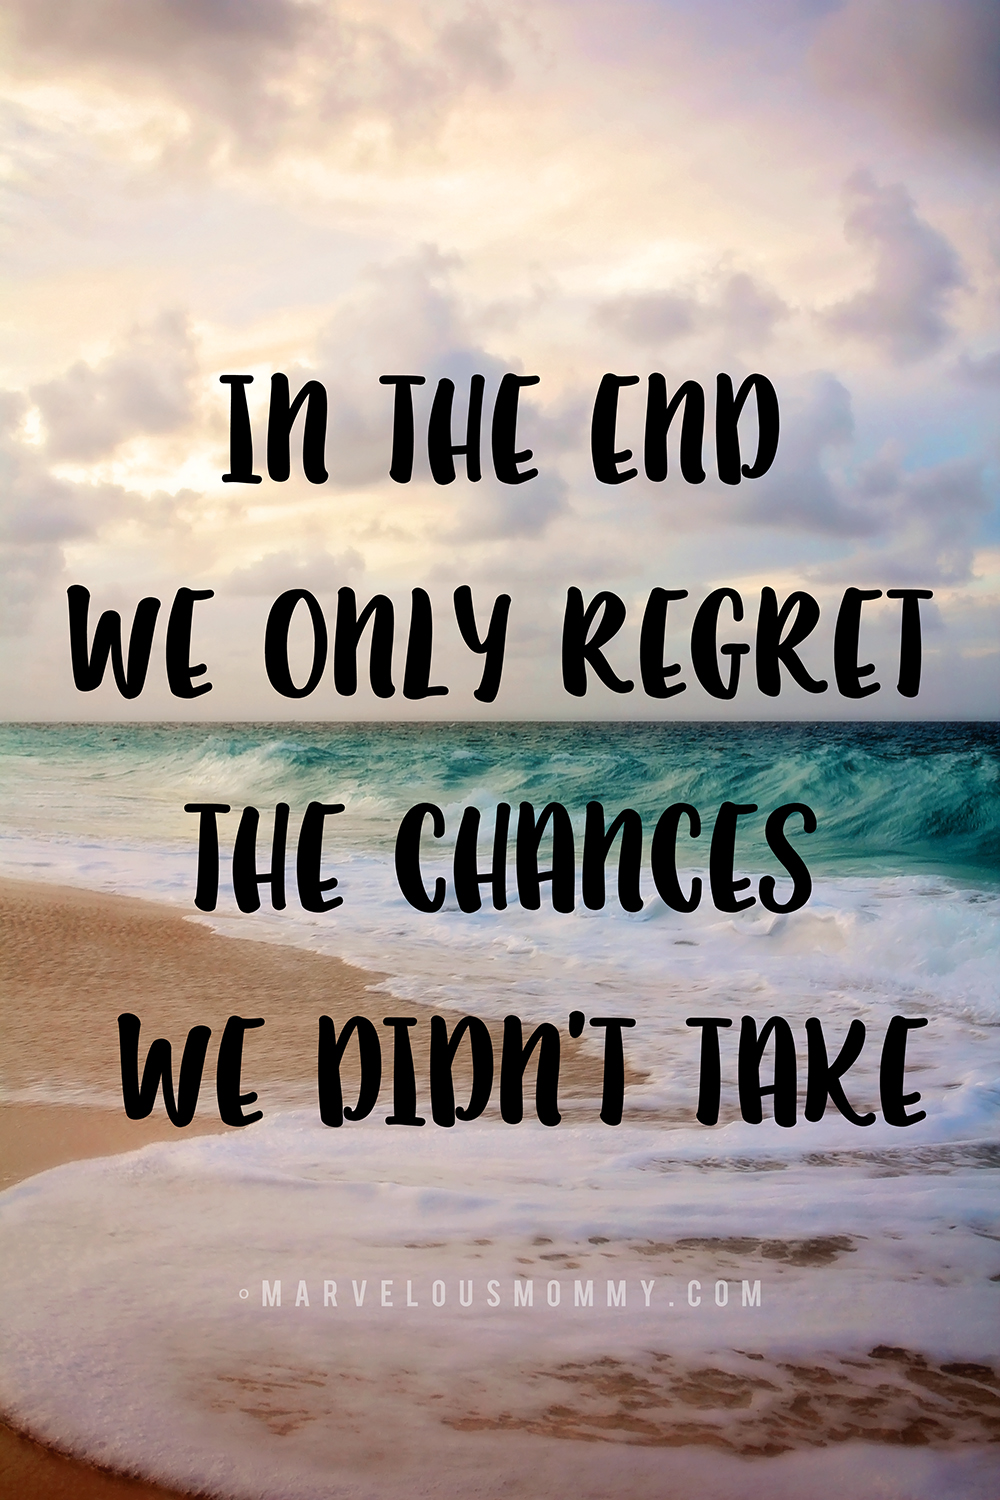 in the end we only regret the chances we didn't take